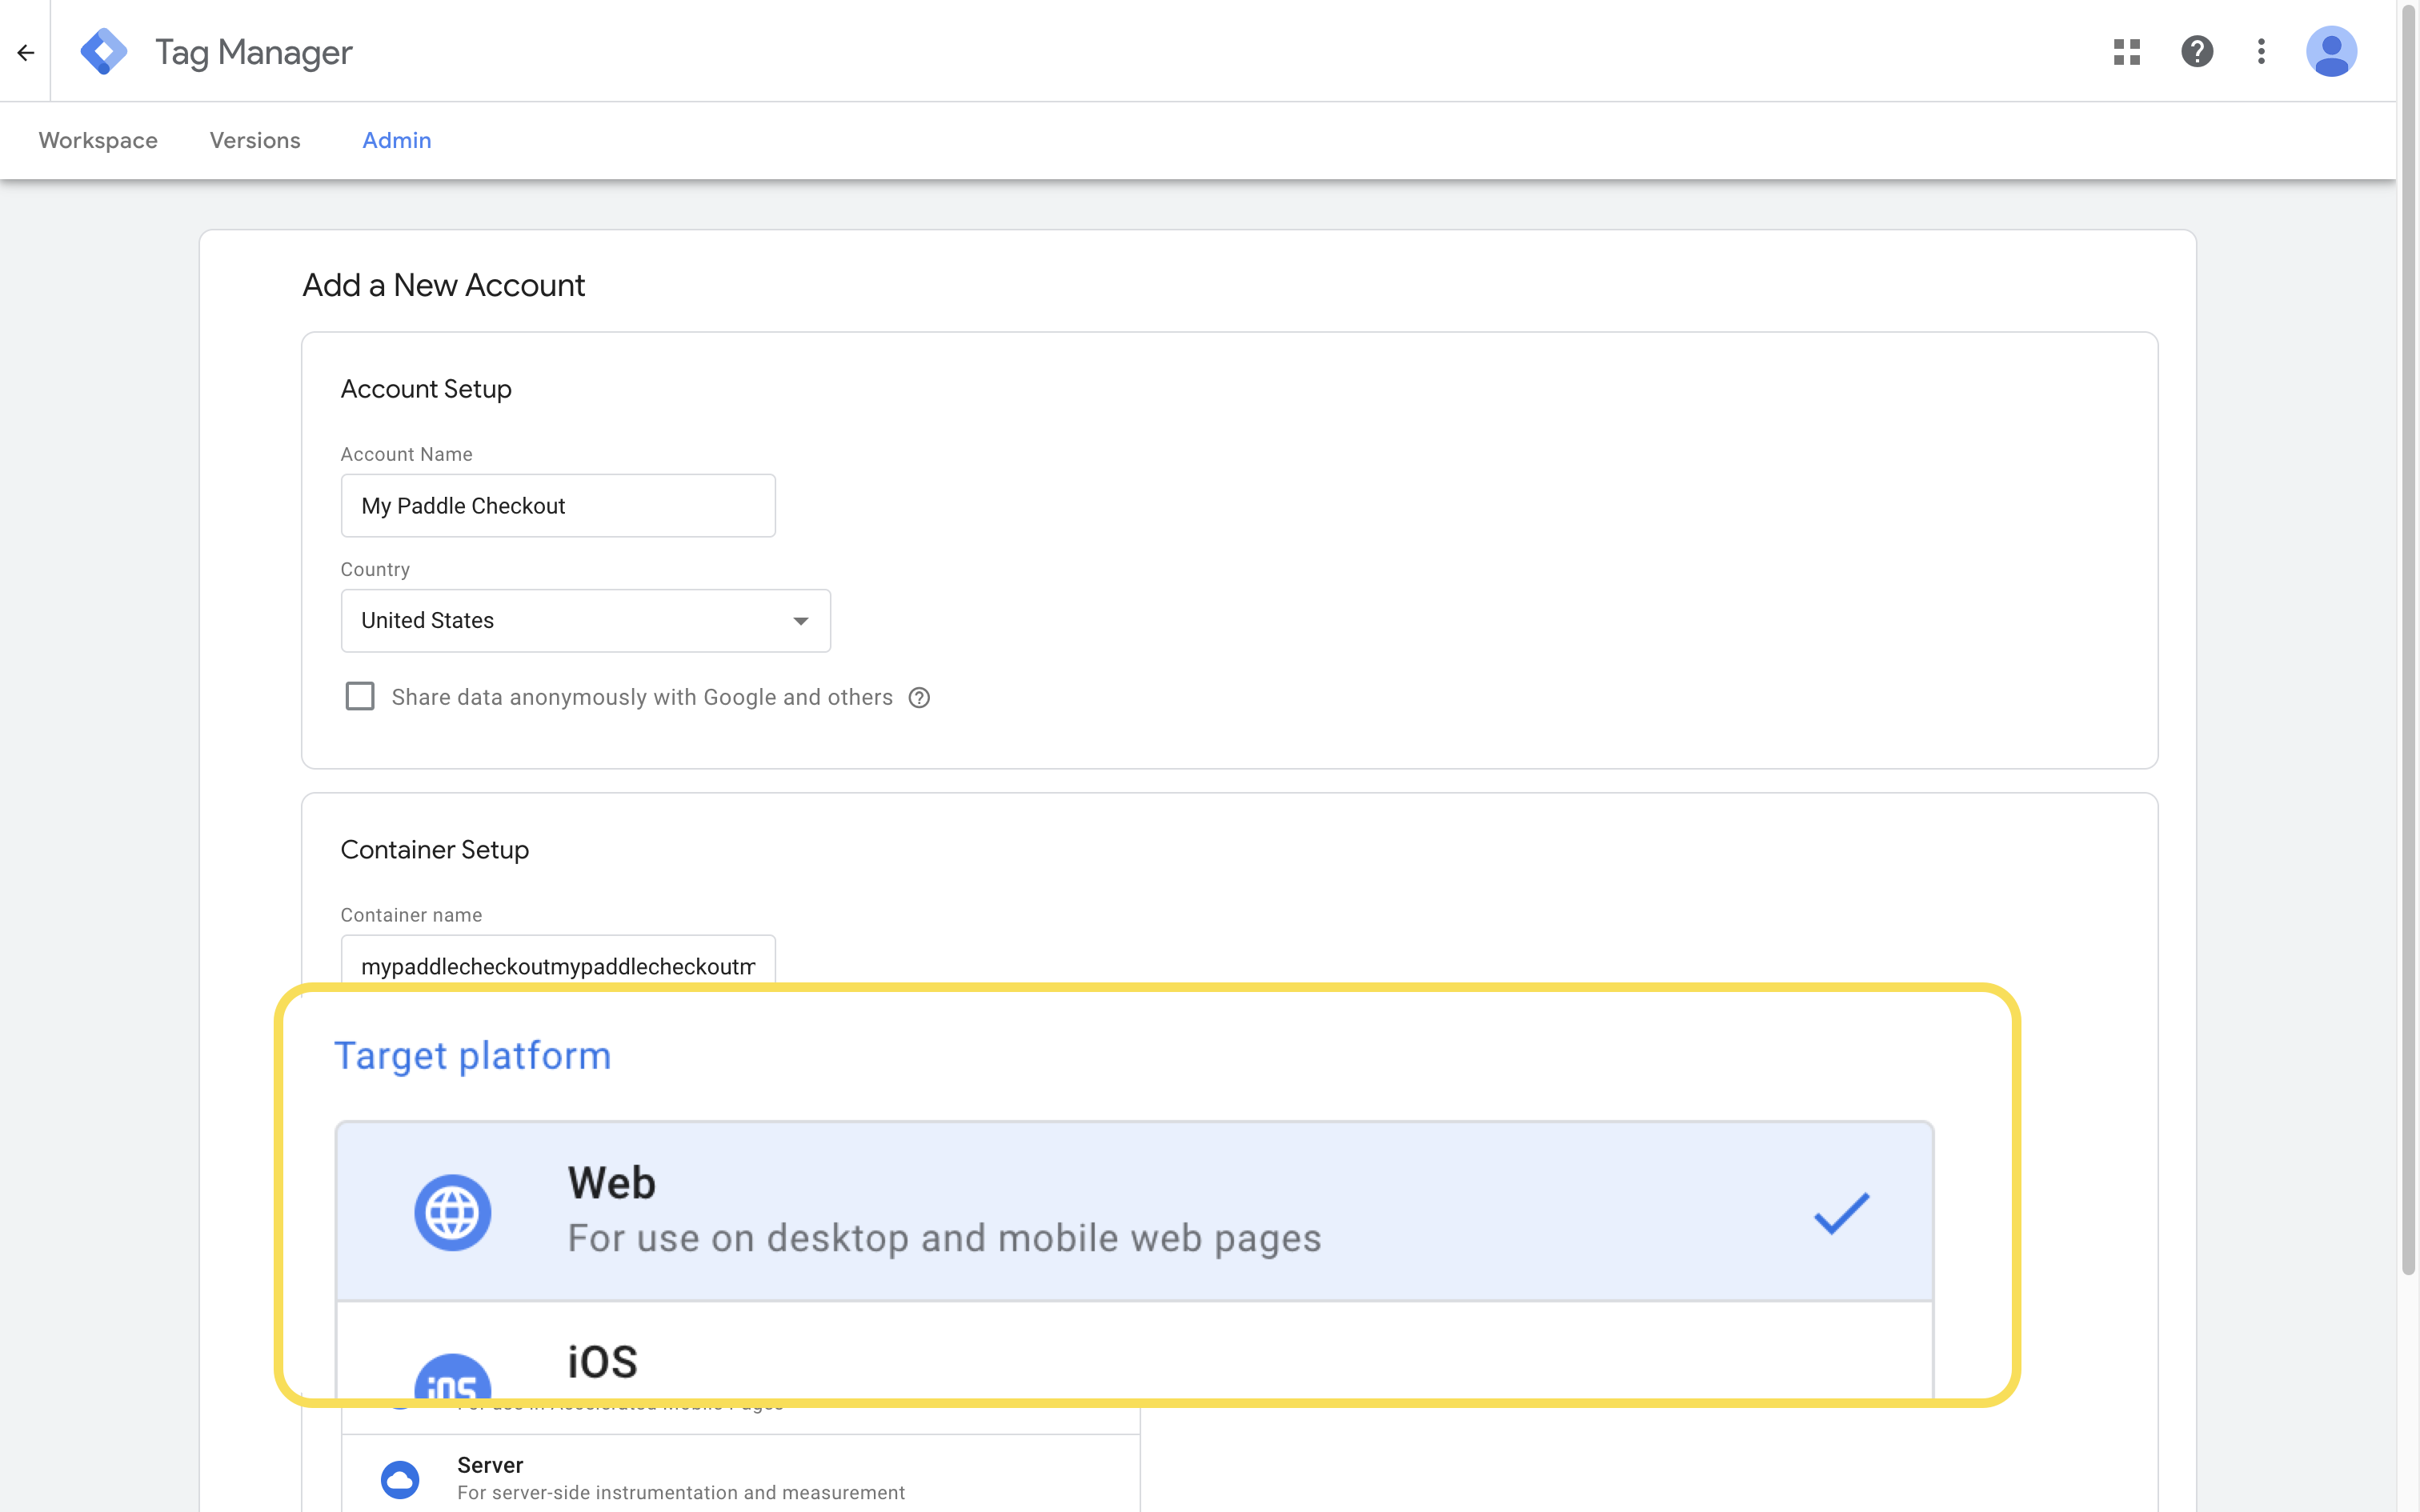 Screenshot showing Google Tag Manager new account screen, calling out web platform